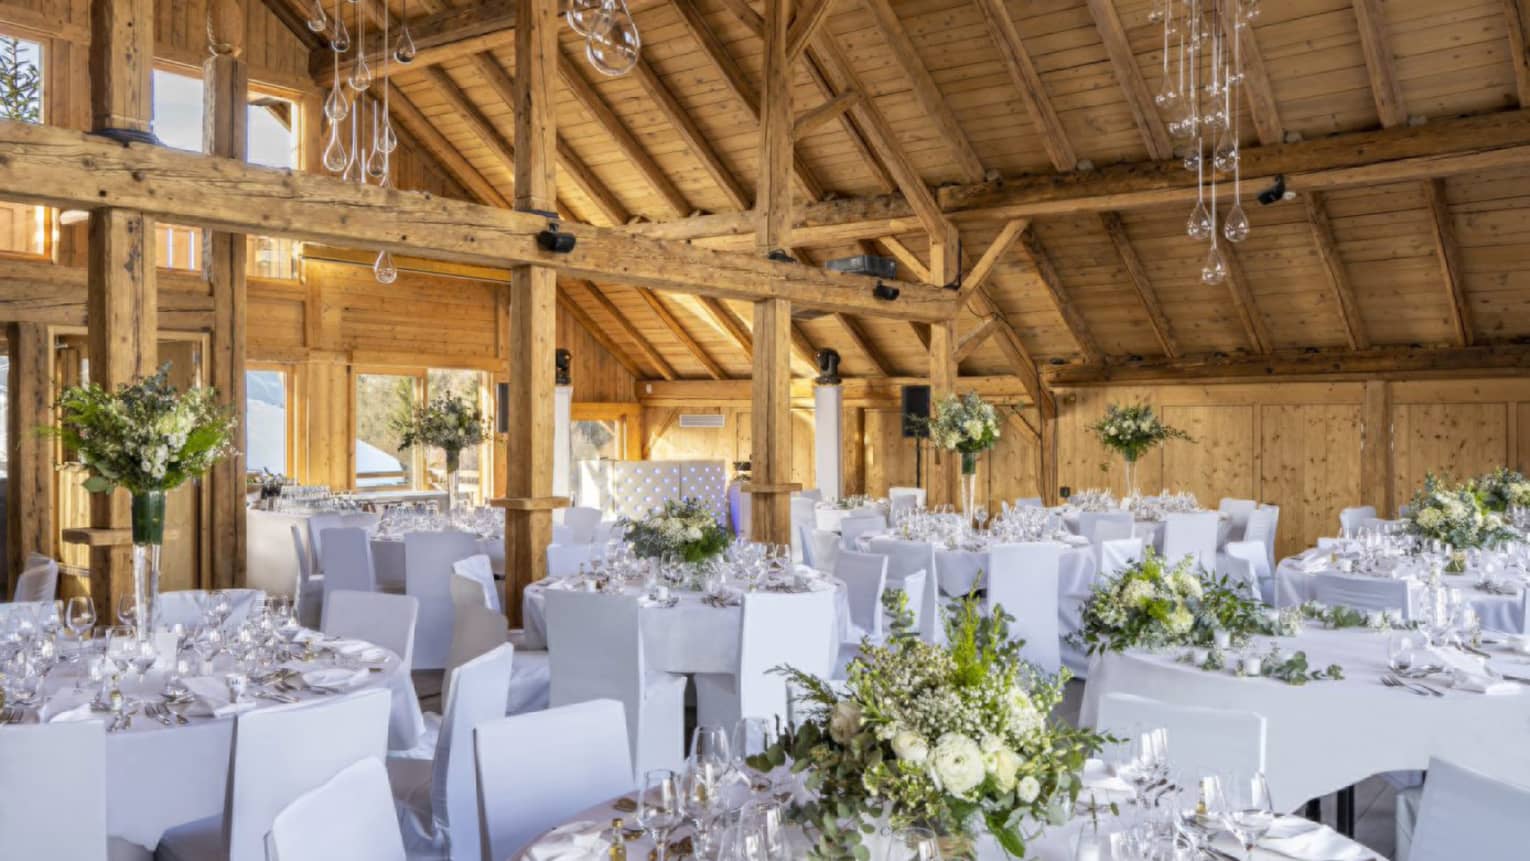 All-white wedding reception setup in Alpine chalet with tall wooden ceilings